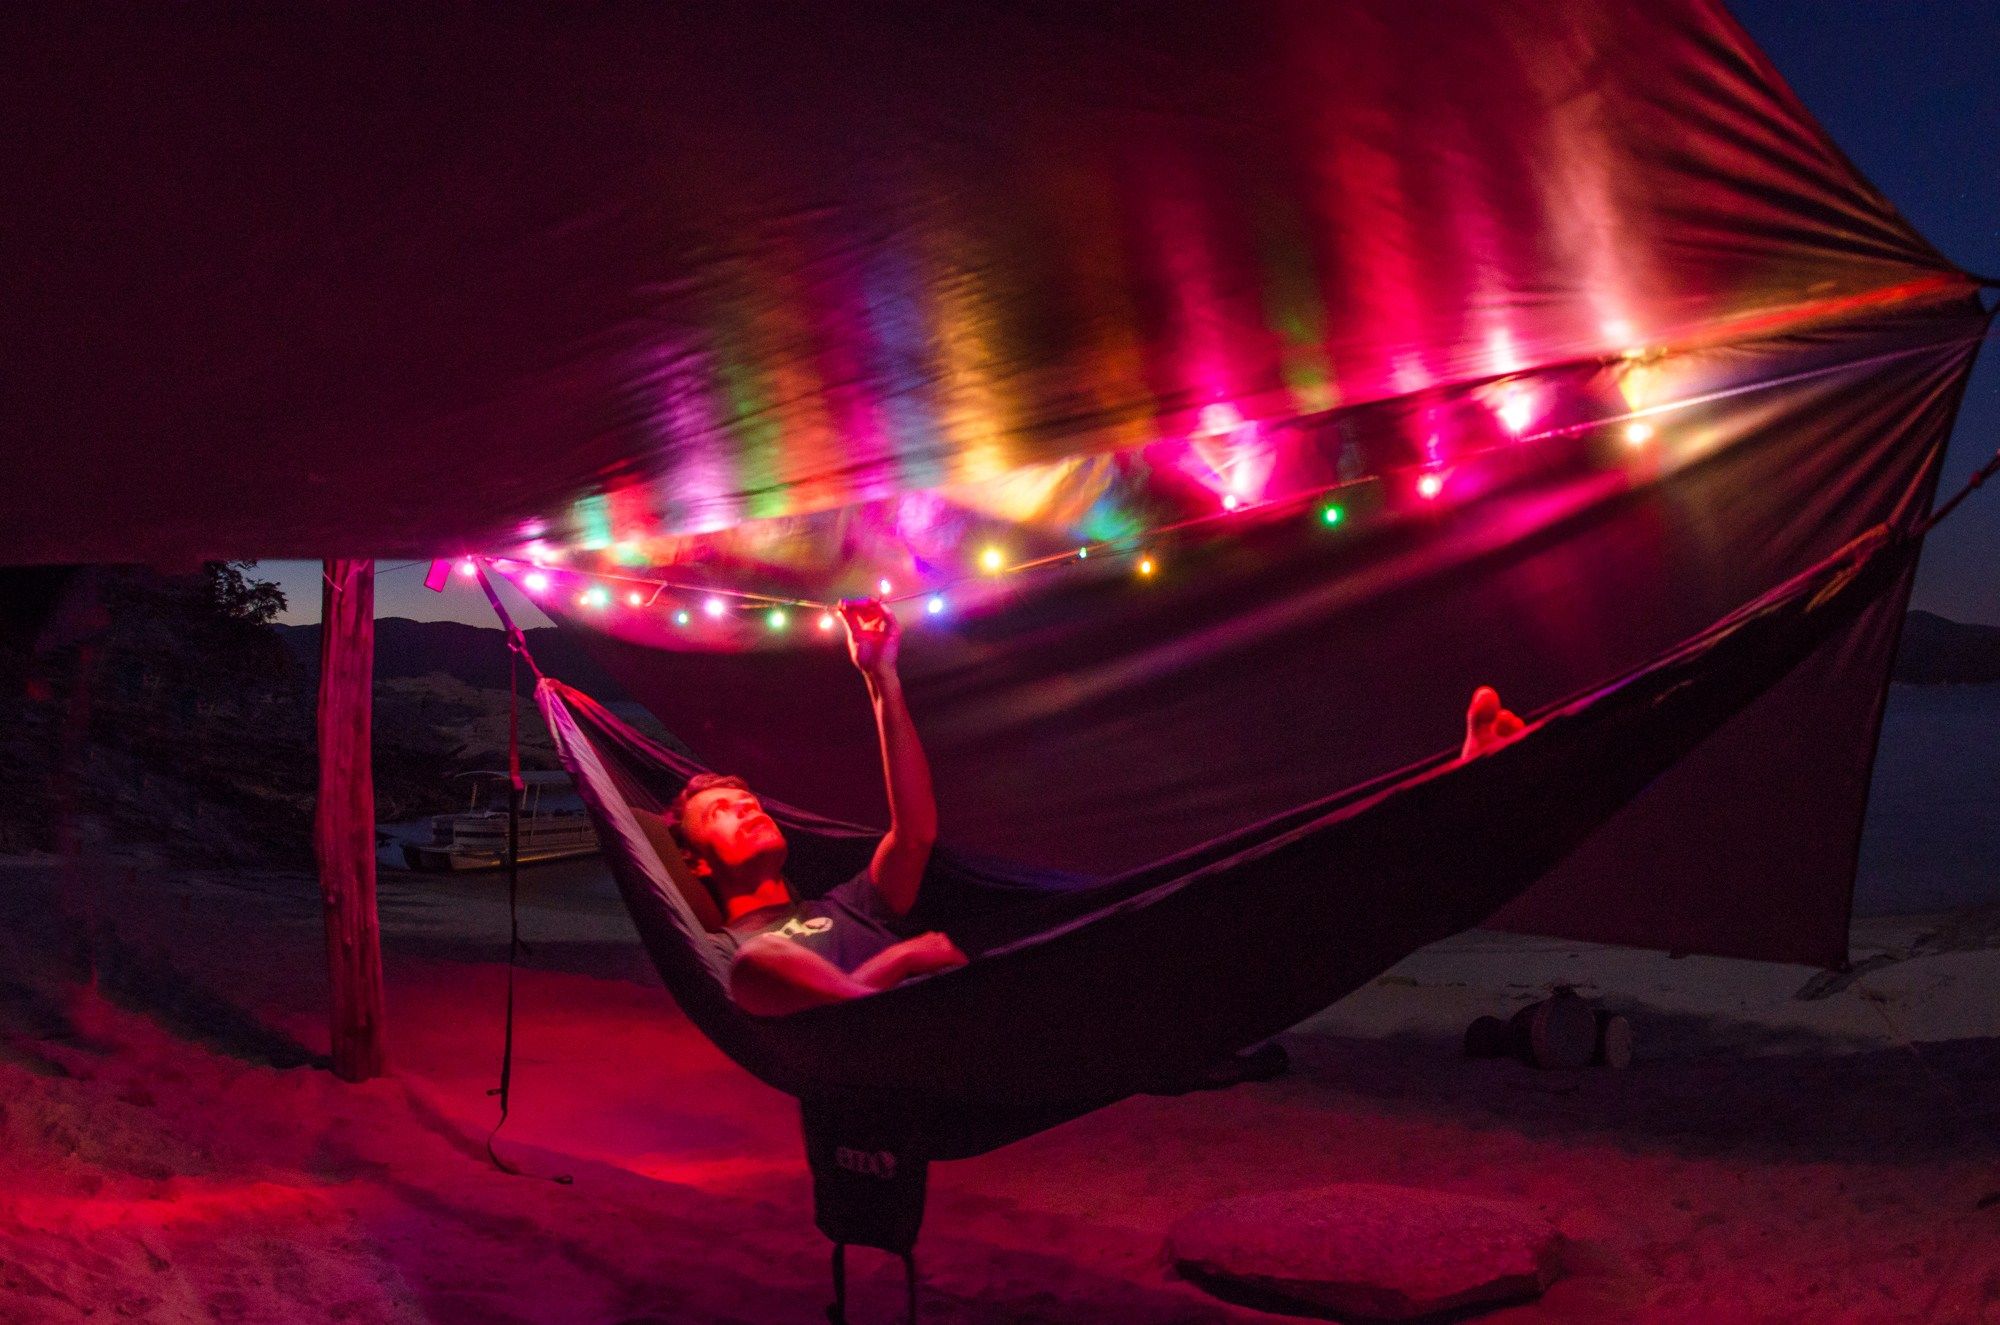 $20 ENO Multicolored Twilights LED Light String at REI.com The ...